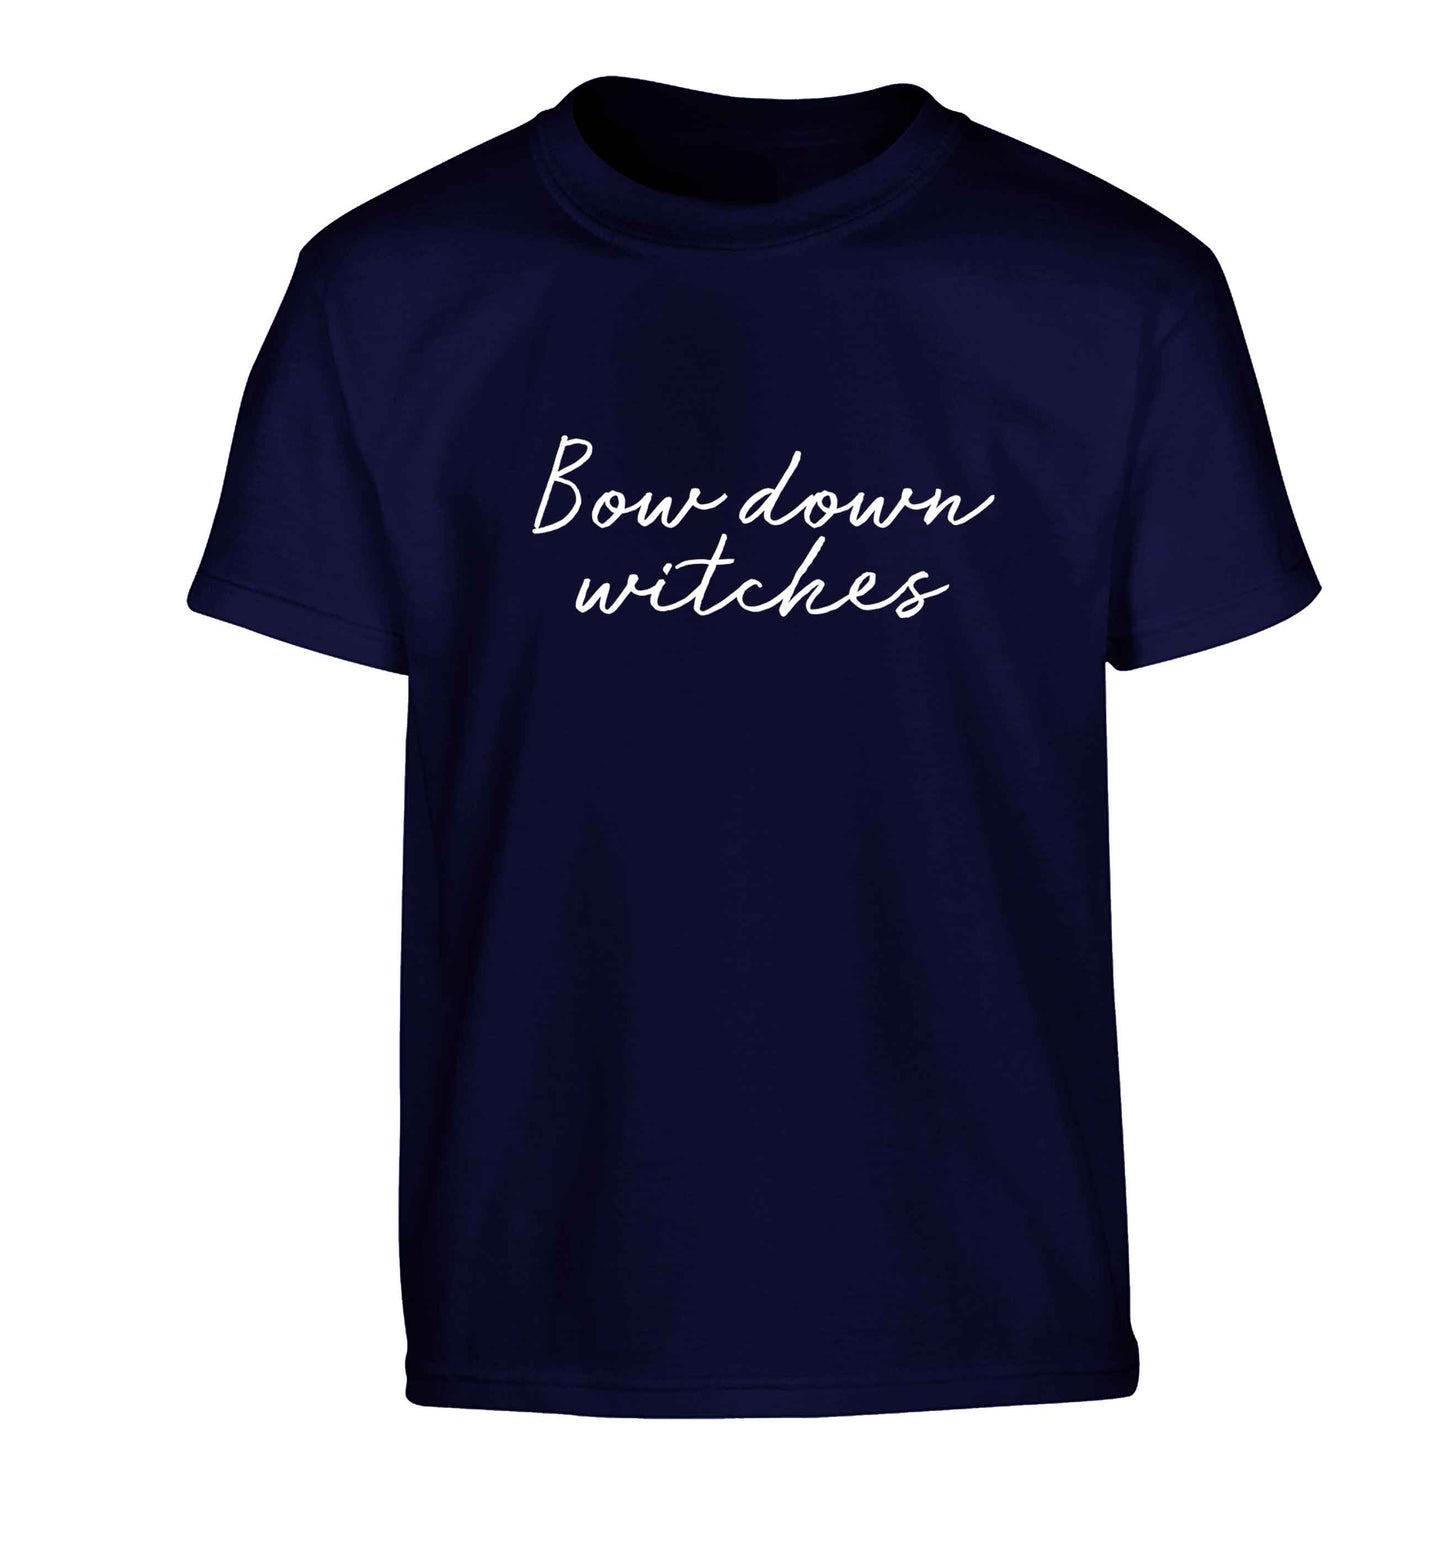 Bow down witches Children's navy Tshirt 12-13 Years